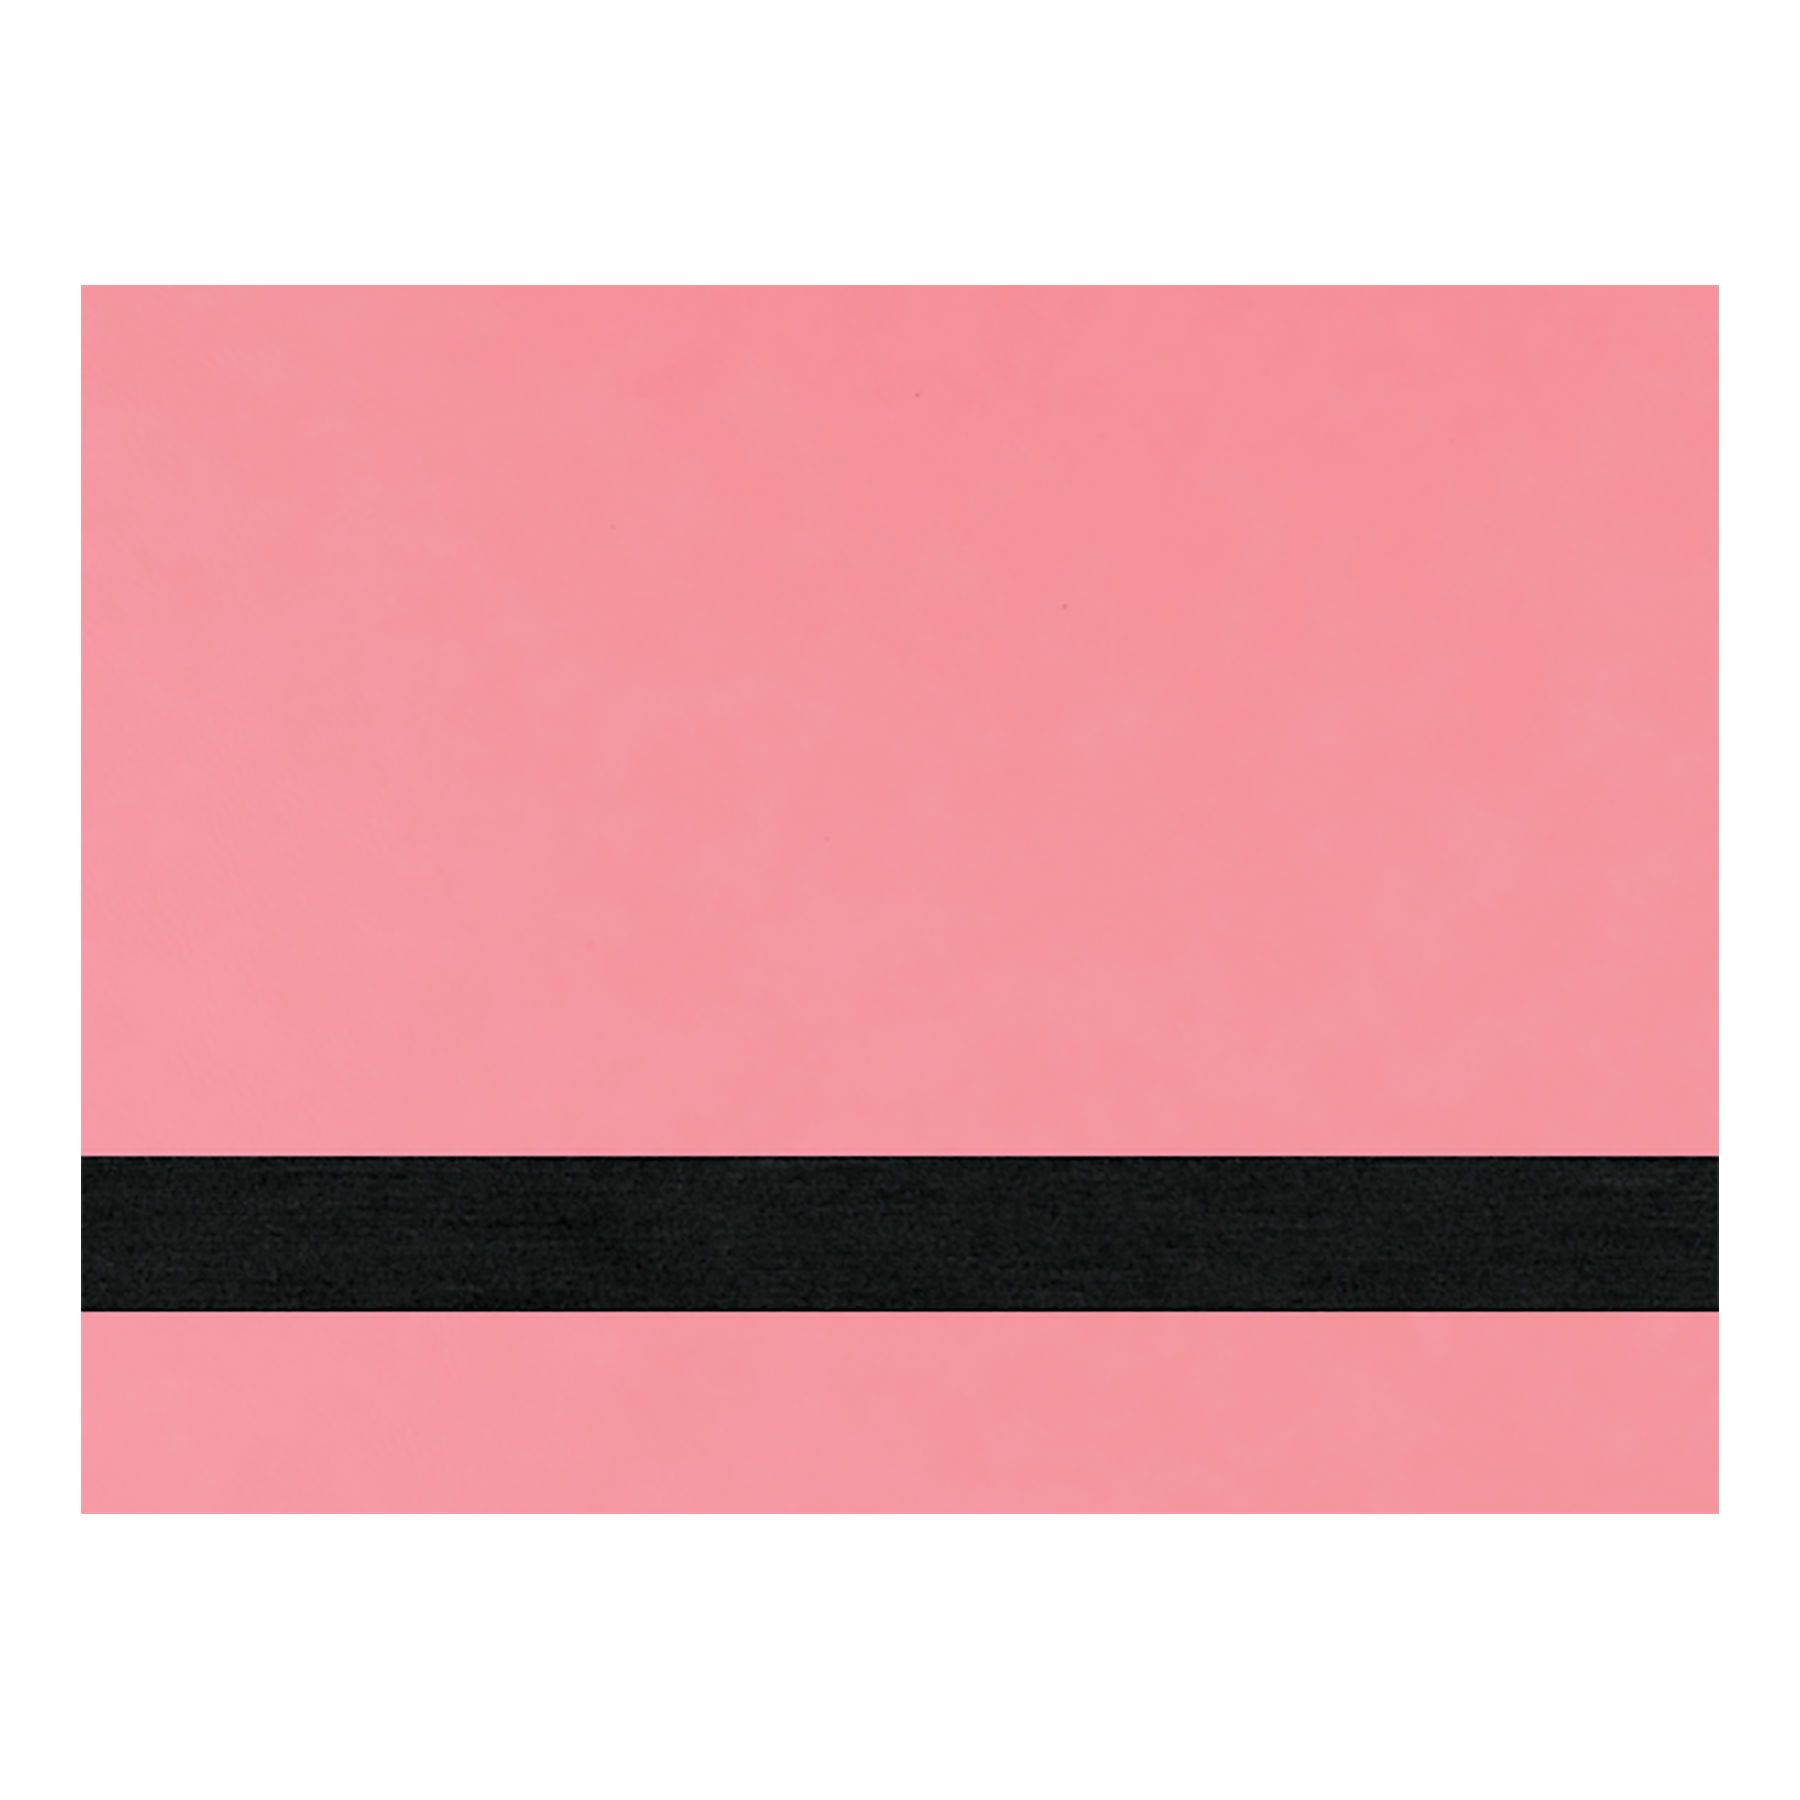 PRE-ORDER! Full Size Laserable Leatherette Sheet Stock, Boss Laser Engravers (Available Jan. 2022) Engraving Supplies Craftworks NW LS-1630 (29" x 15") Pink/Black 